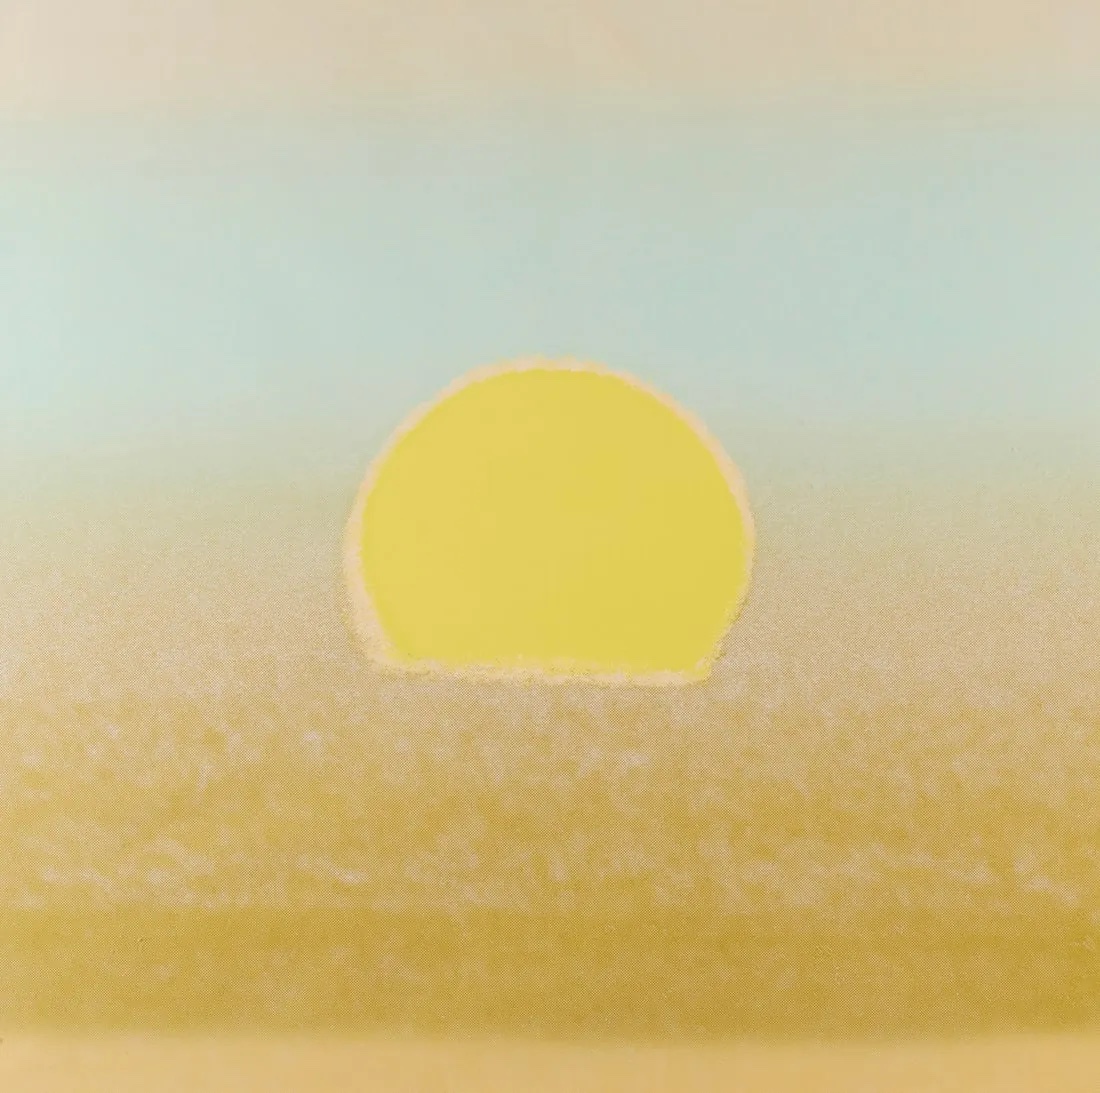 Andy Warhol, 'Sunset,' estimated at $70,000-$100,000 at Revere.